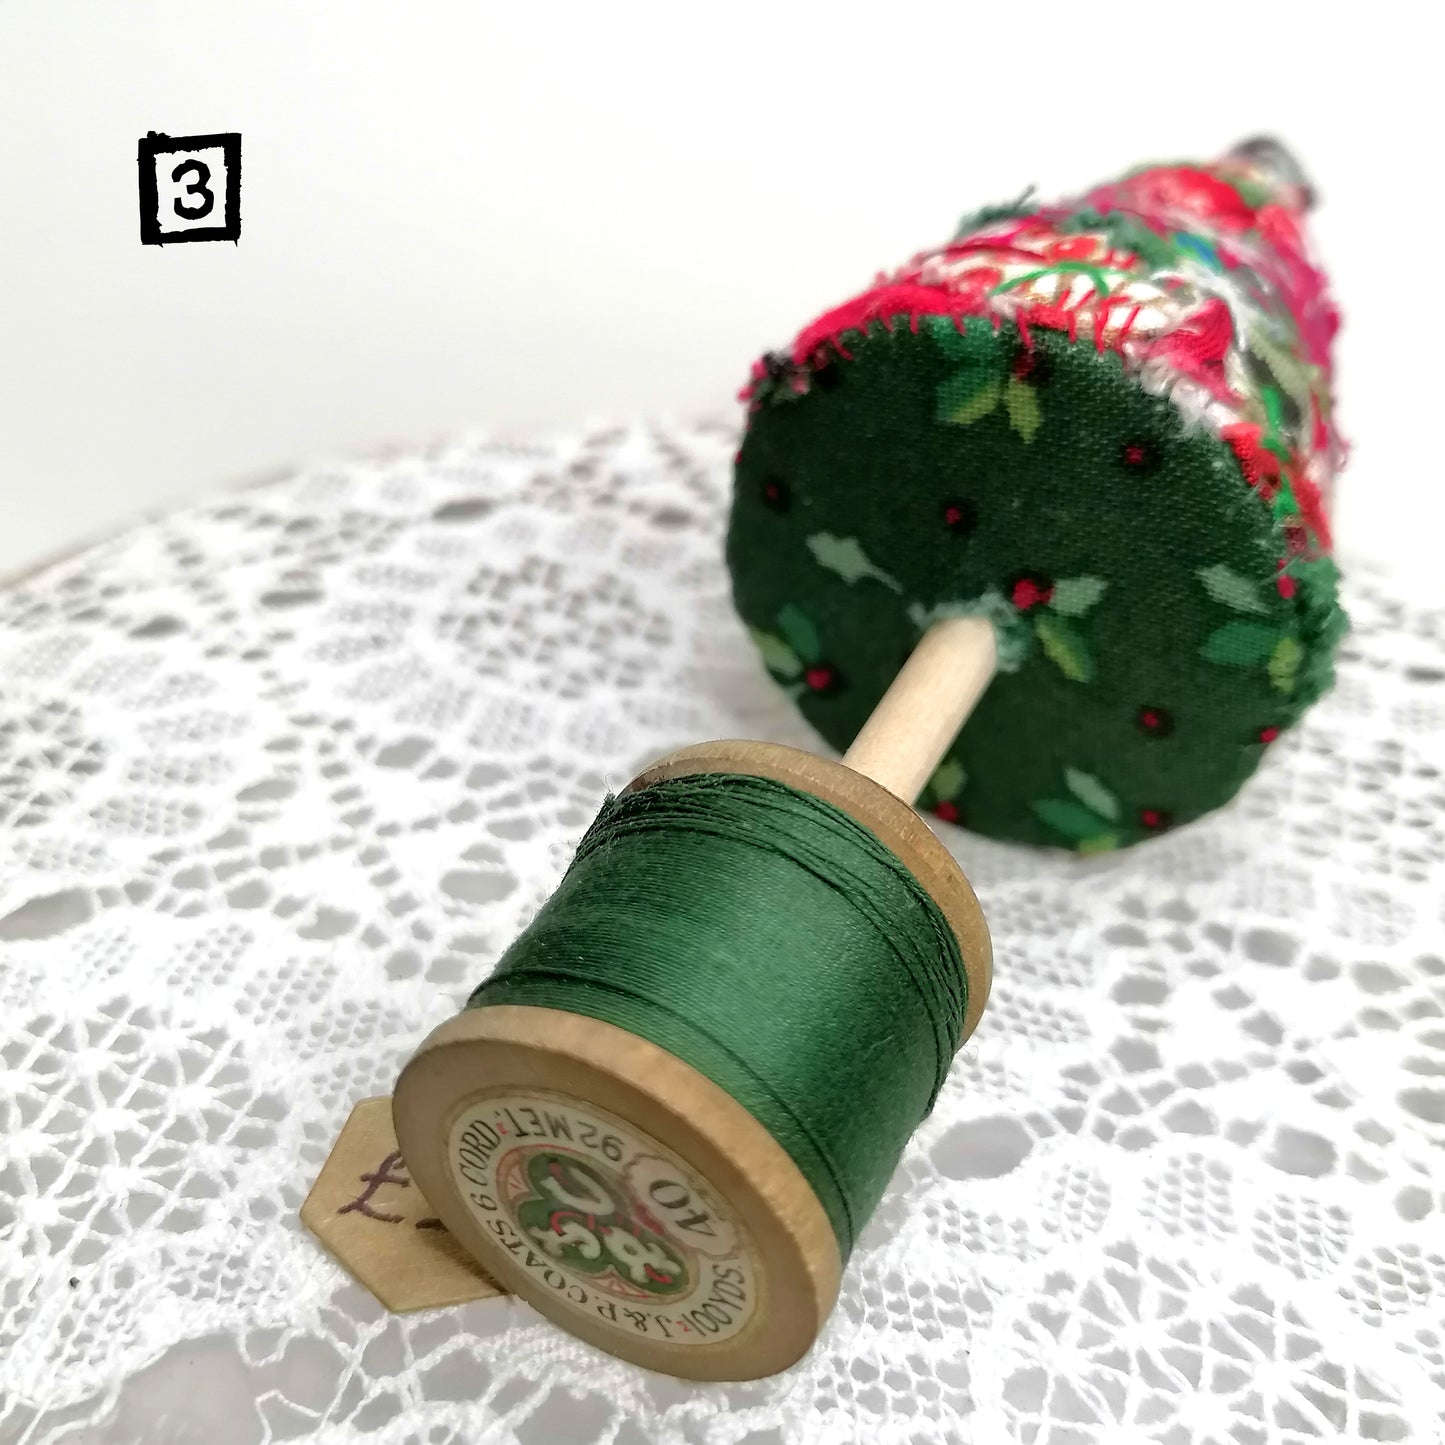 Slow-stitched Patchwork Christmas Trees